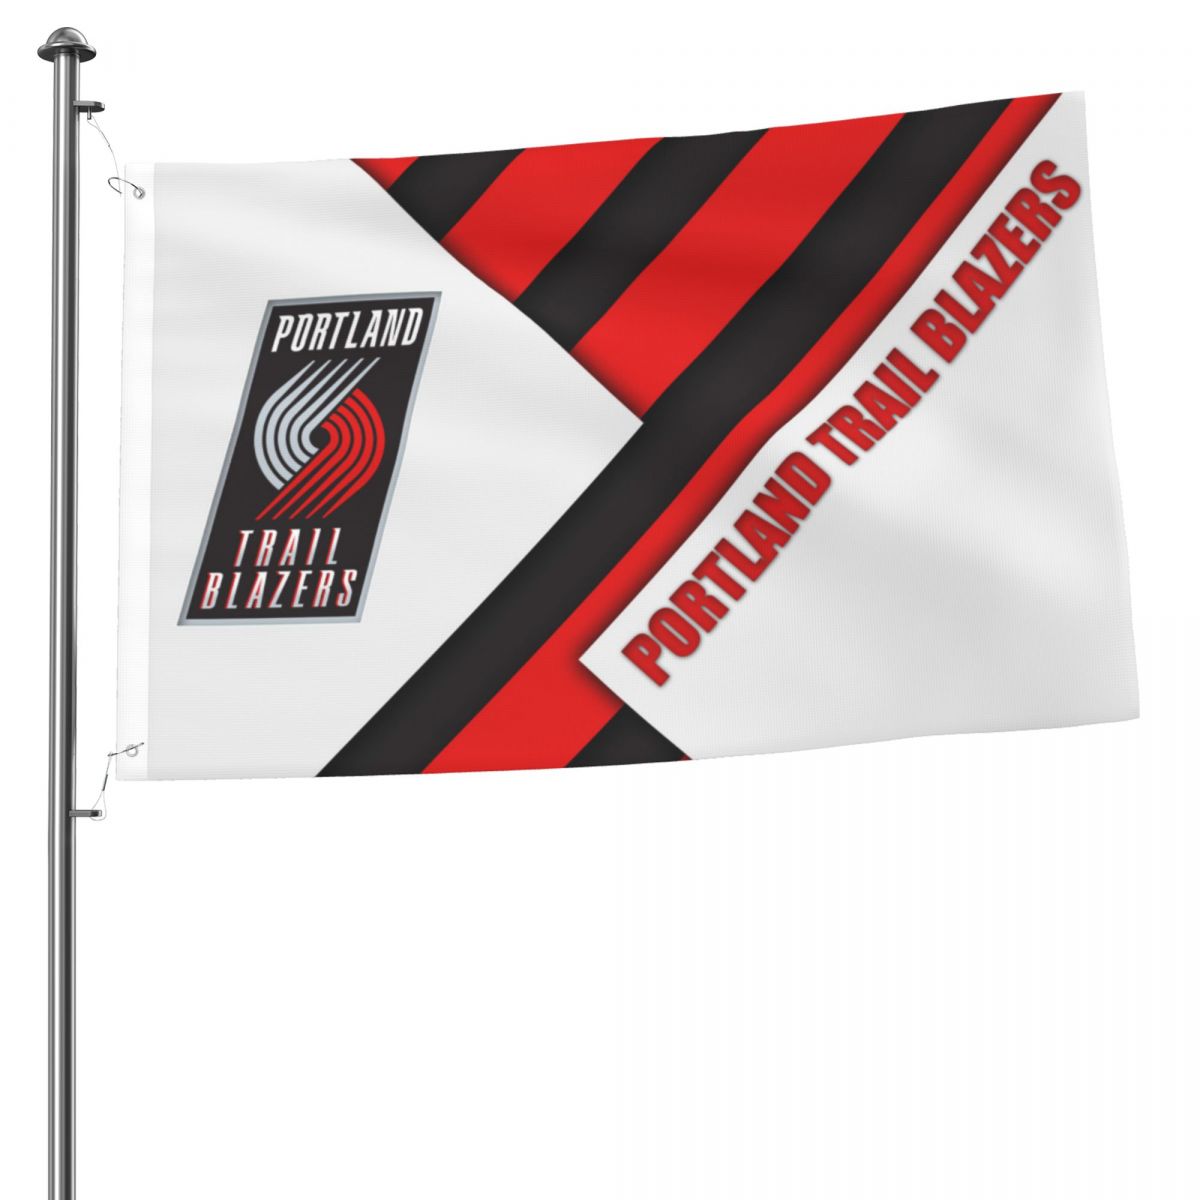 Portland Trail Blazers Abstraction Design 2x3FT Flag